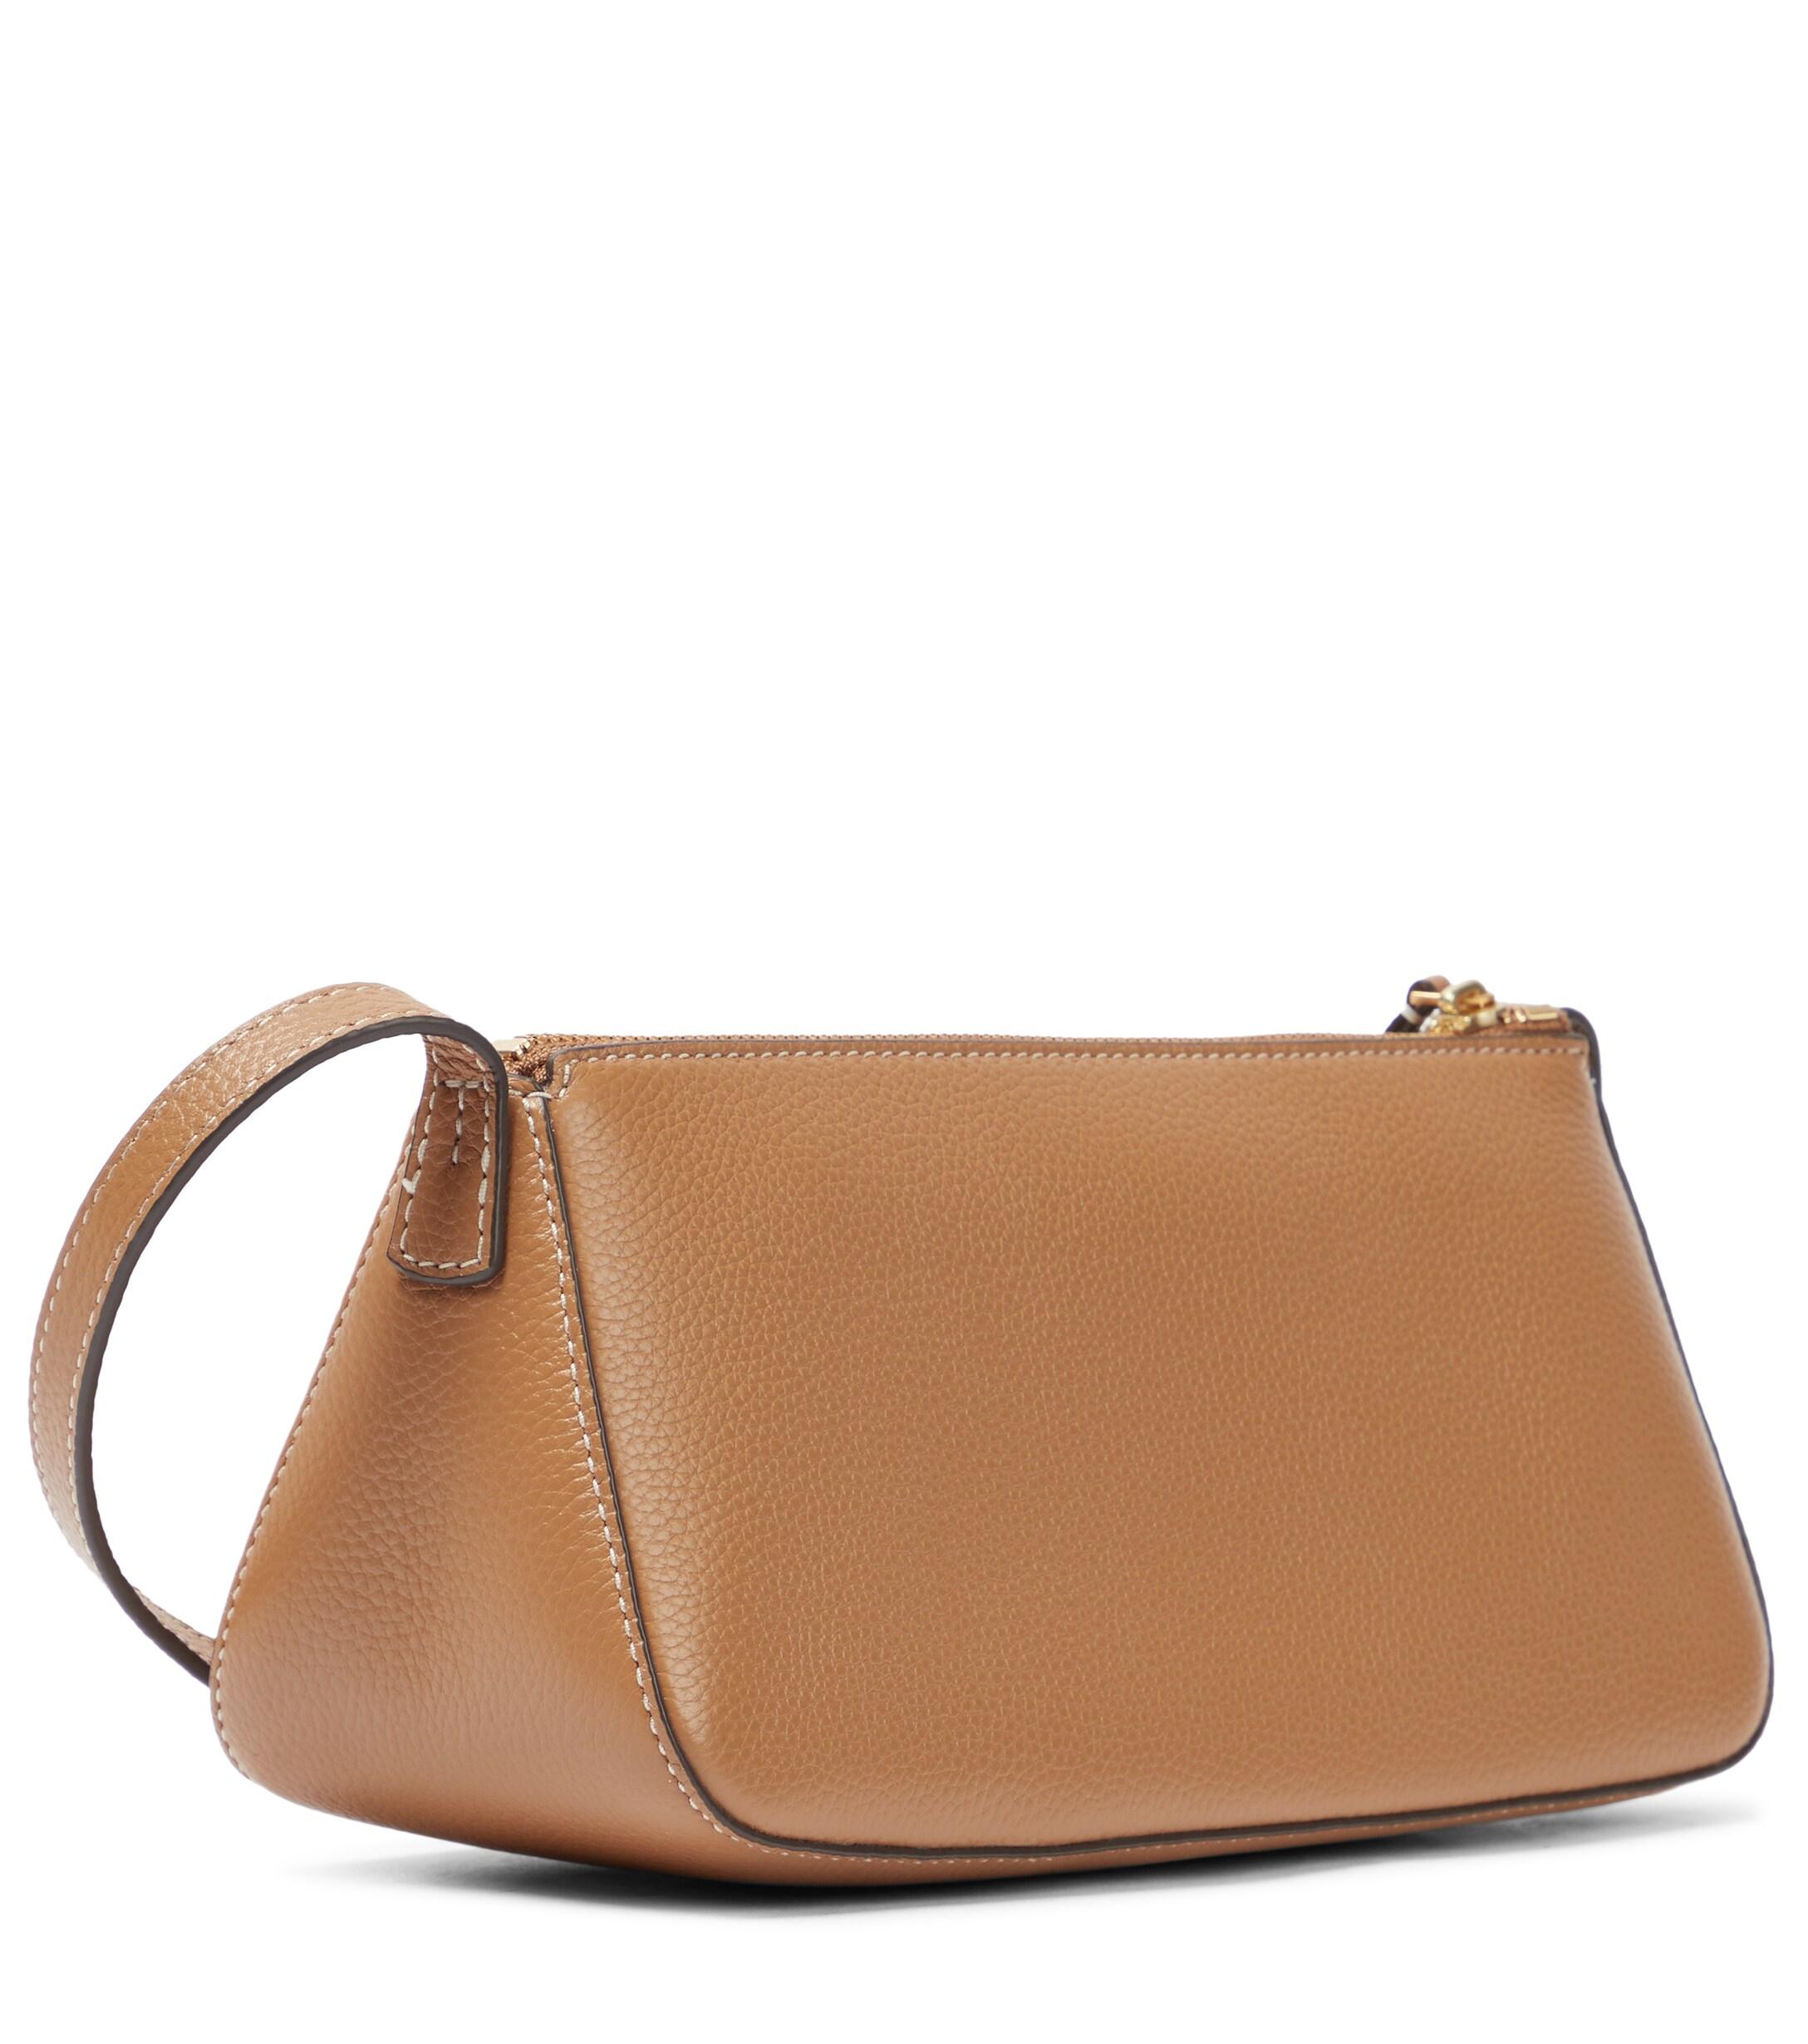 Tory Burch Mcgraw Wedge Leather Shoulder Bag | Lyst